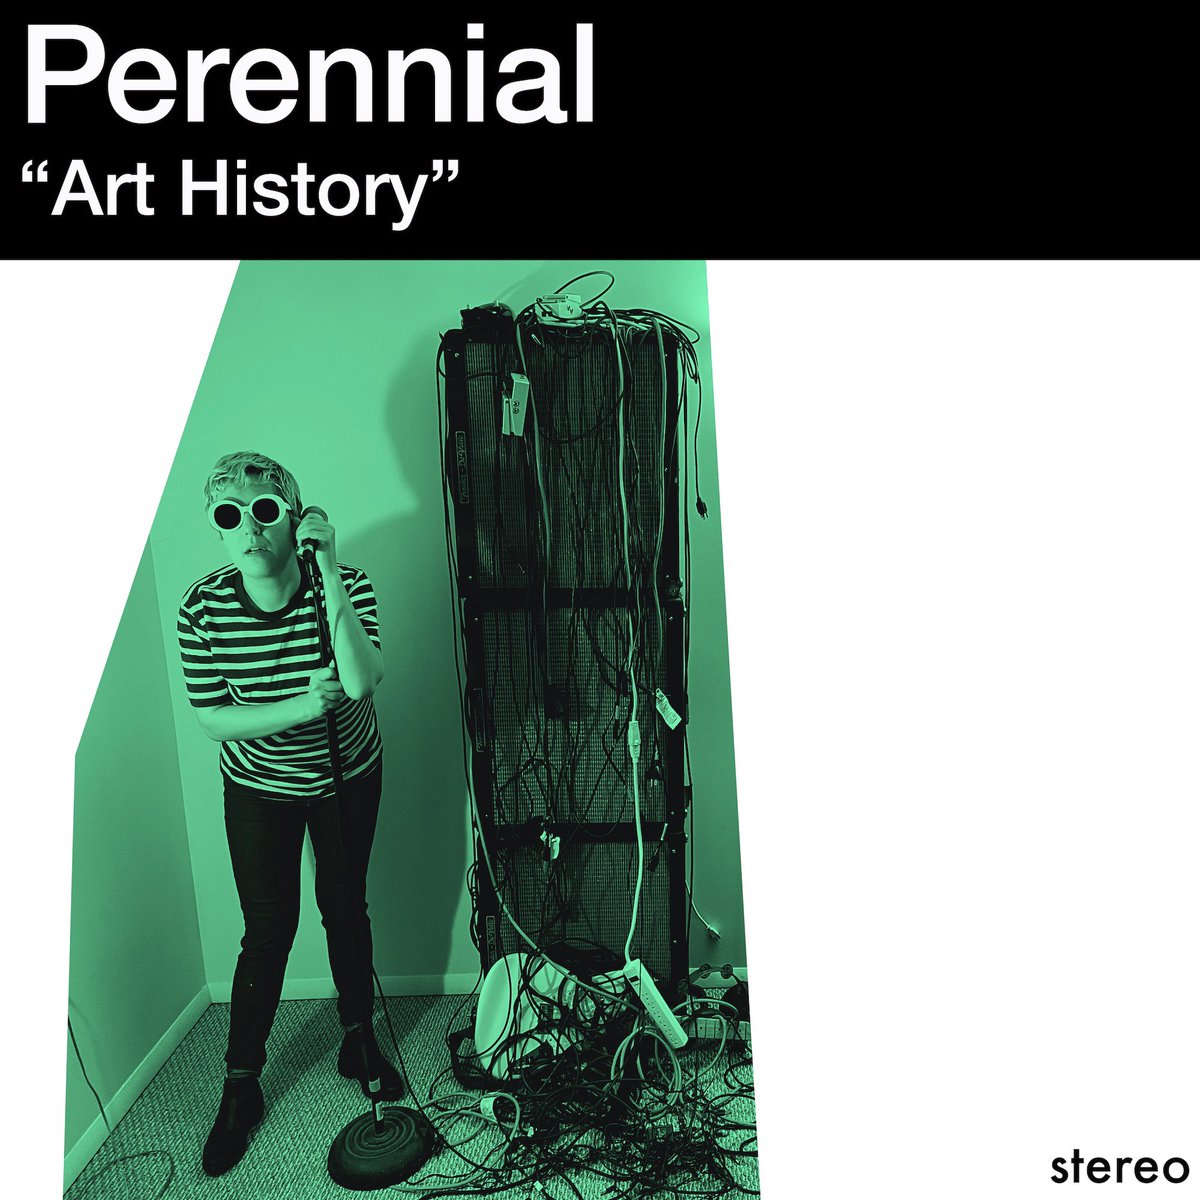 We are absolutely thrilled to announce our new album, ‘Art History’!
(@ejrc @SafeSuburban @totallyrealrecs)
You can stream the first single, “Action Painting” & preorder the album on CD, cassette & exclusive clear/green/black splatter vinyl on our Bandcamp
perennialtheband.bandcamp.com/album/art-hist…